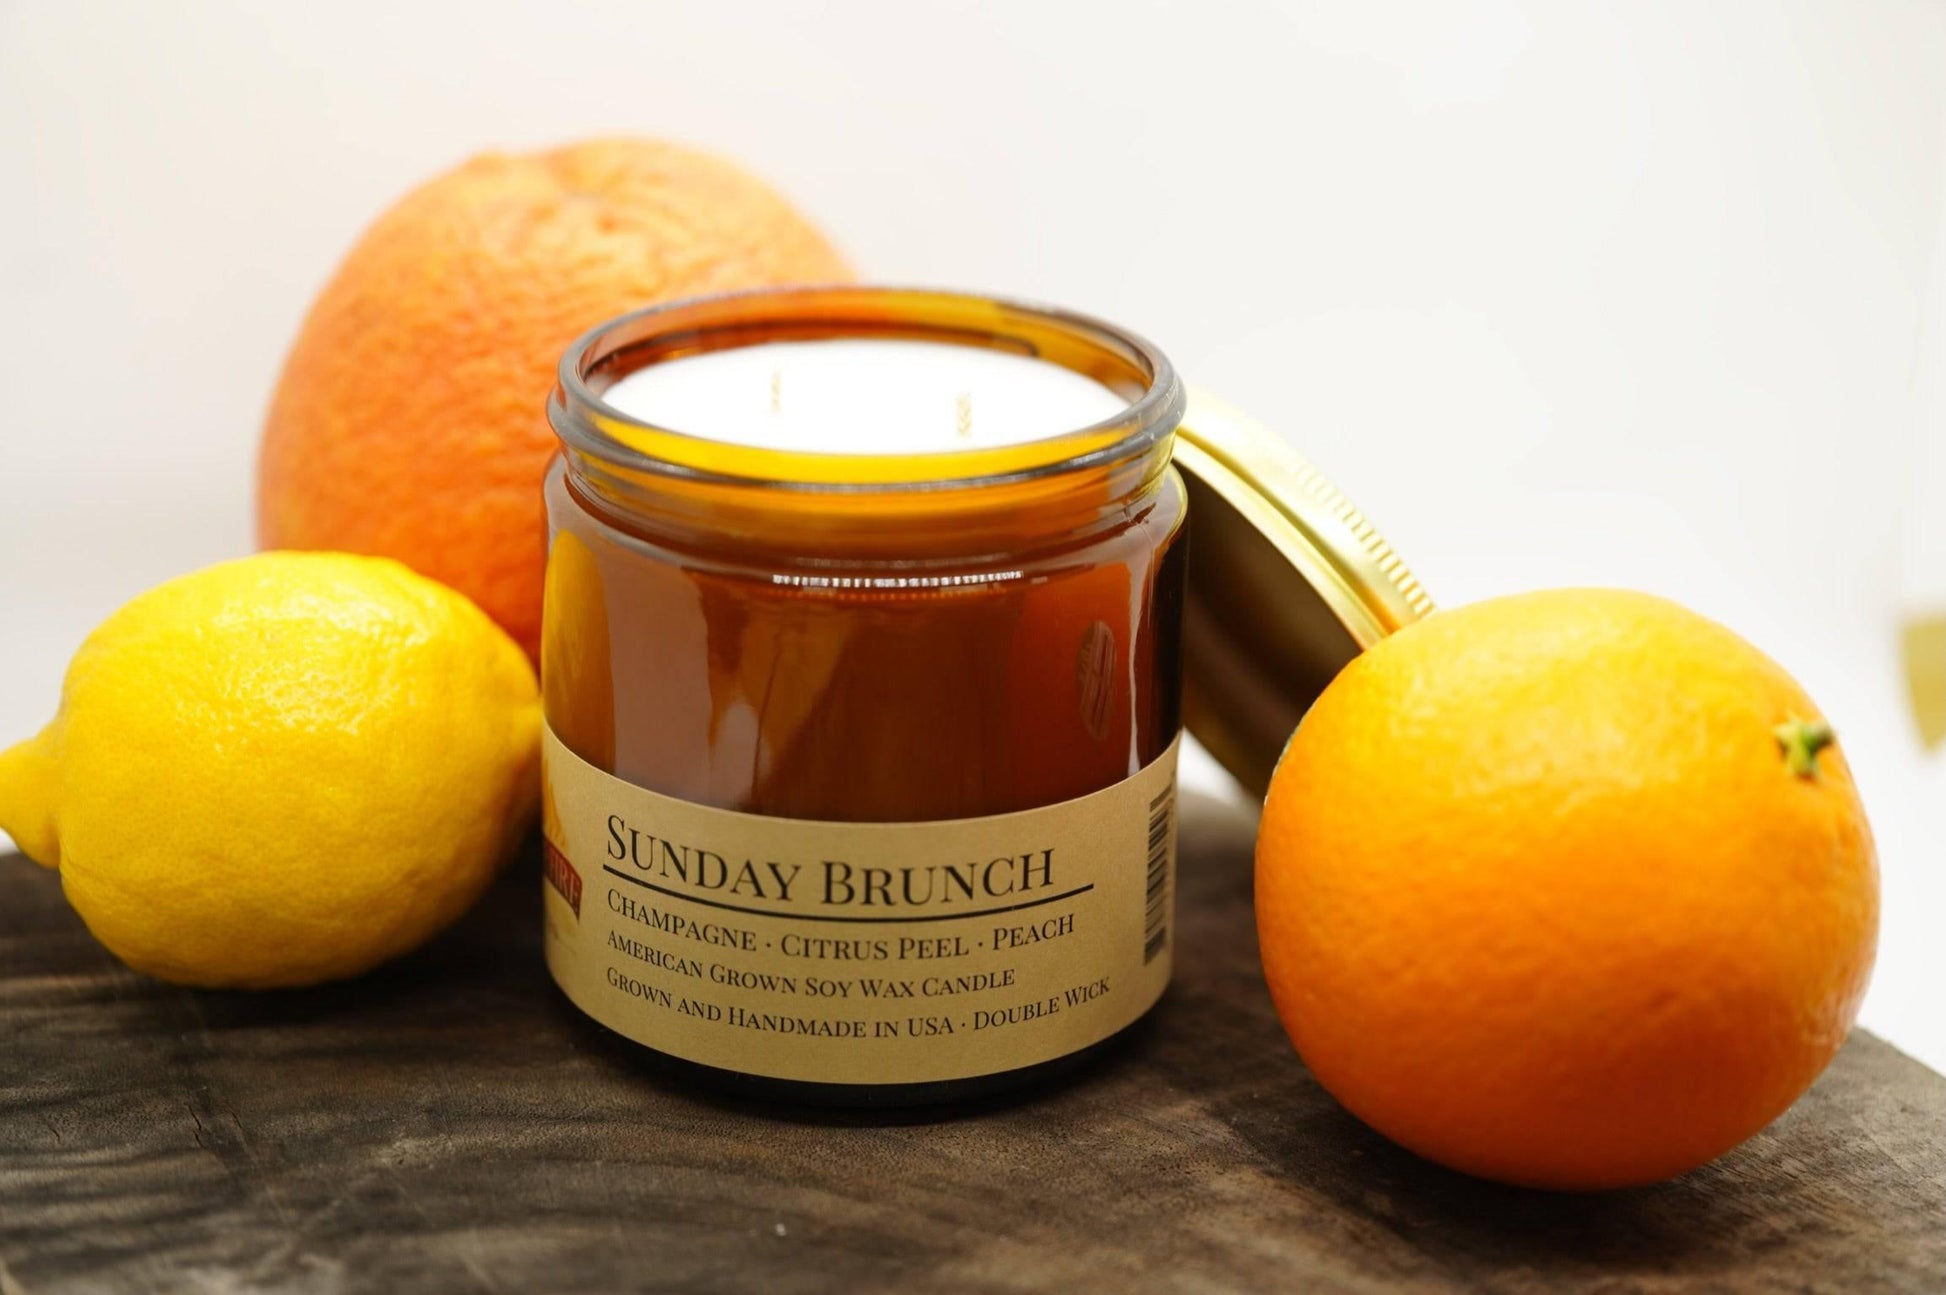 Sunday Brunch Soy Wax Candle | 16 oz Double Wick Amber Apothecary Jar - Prairie Fire Candles